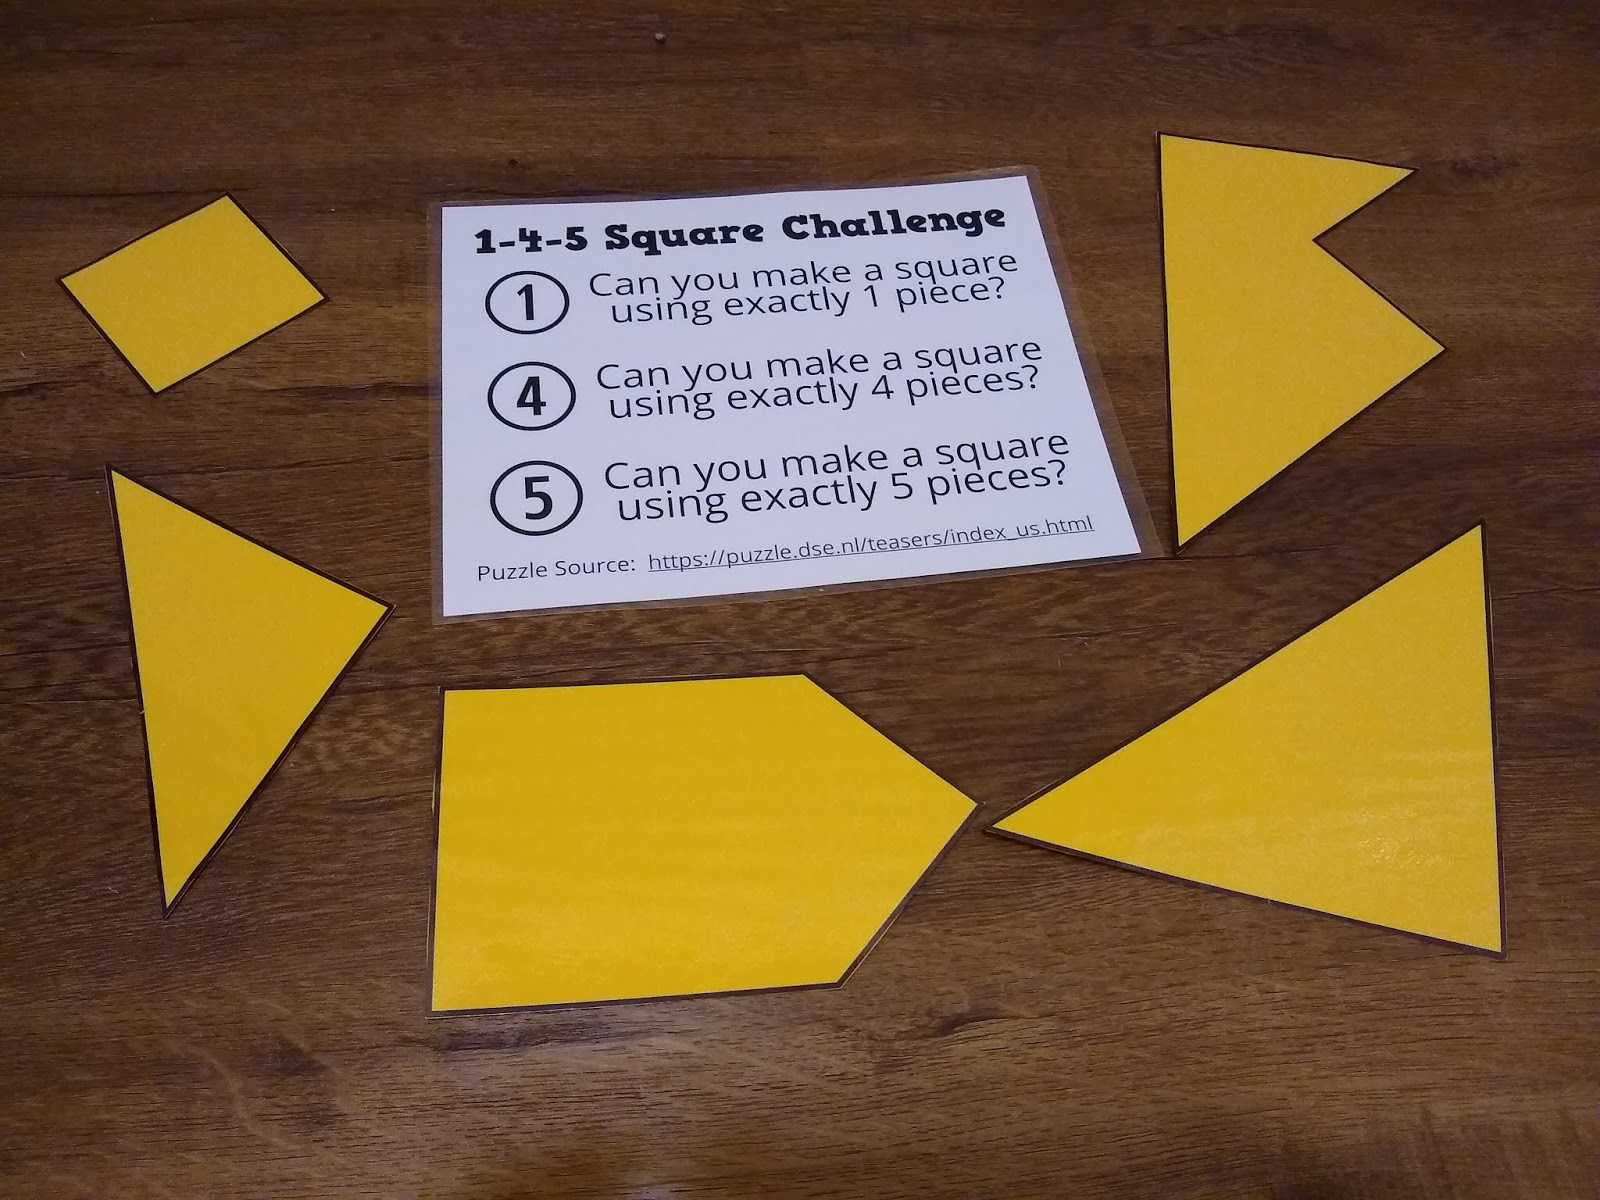 1-4-5 Square Challenge for the first week of school 